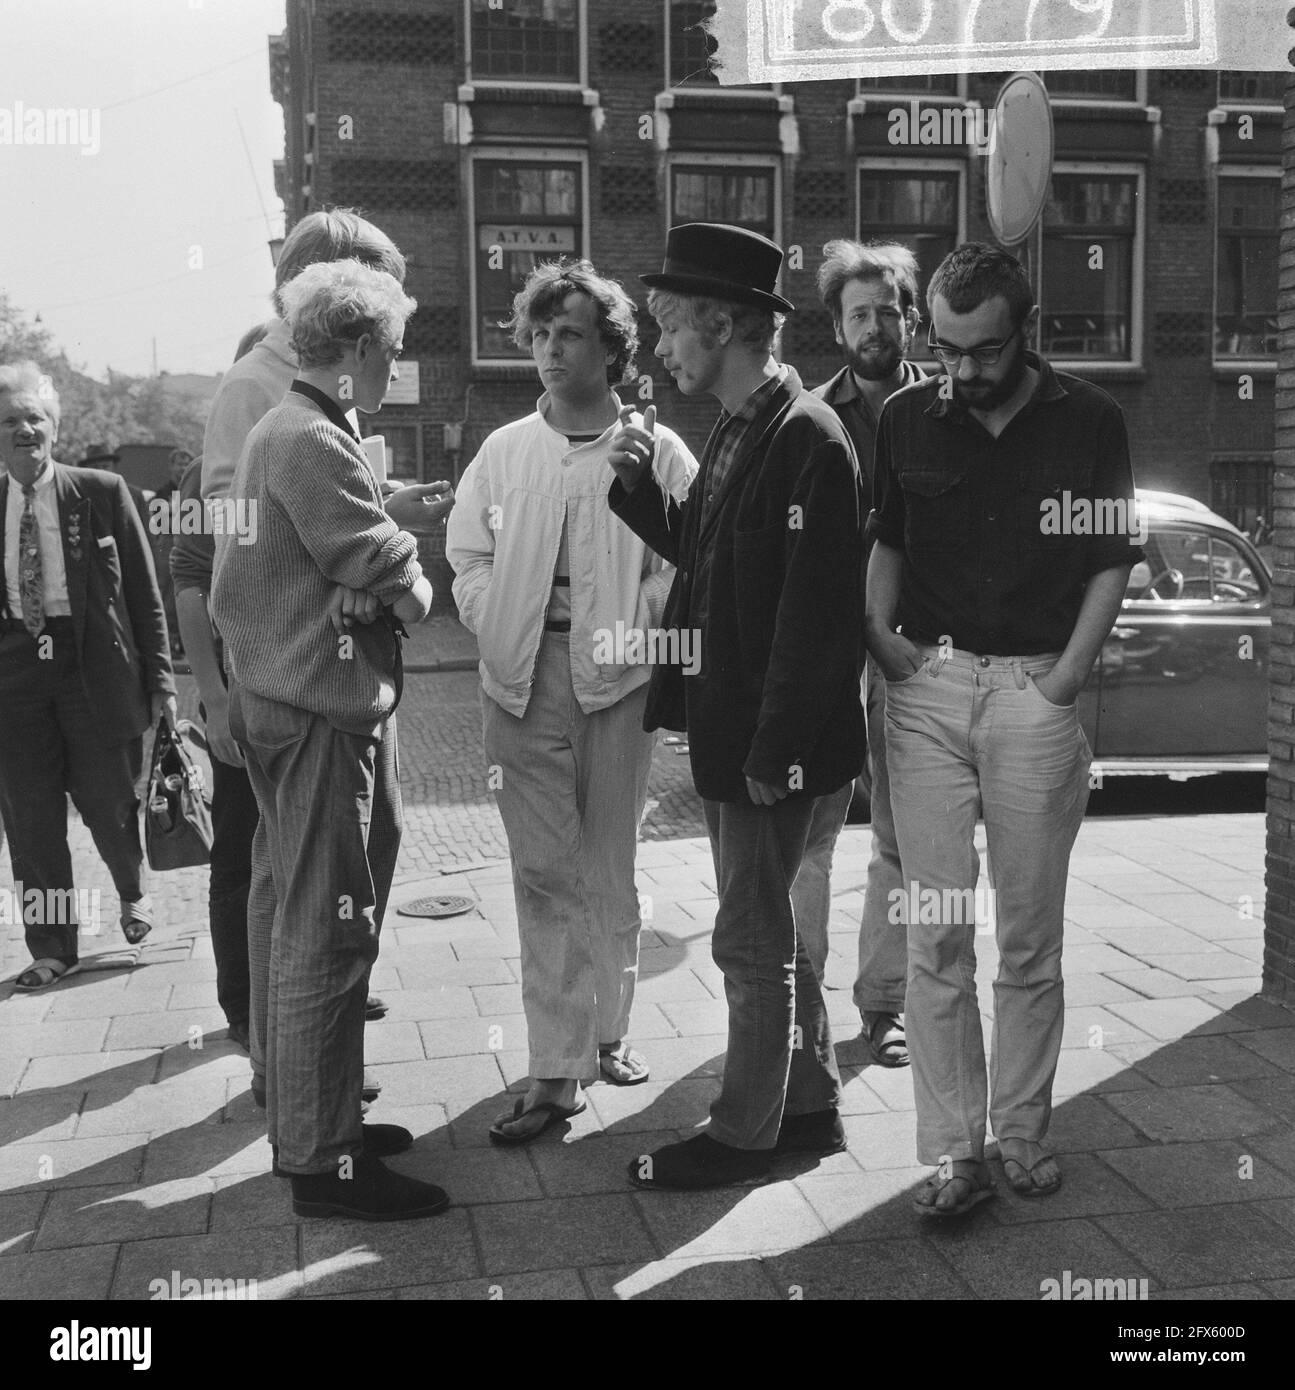 Grootveld, Stolk, Van Duyn, August 14, 1965, activists, police, The Netherlands, 20th century press agency photo, news to remember, documentary, historic photography 1945-1990, visual stories, human history of the Twentieth Century, capturing moments in time Stock Photo